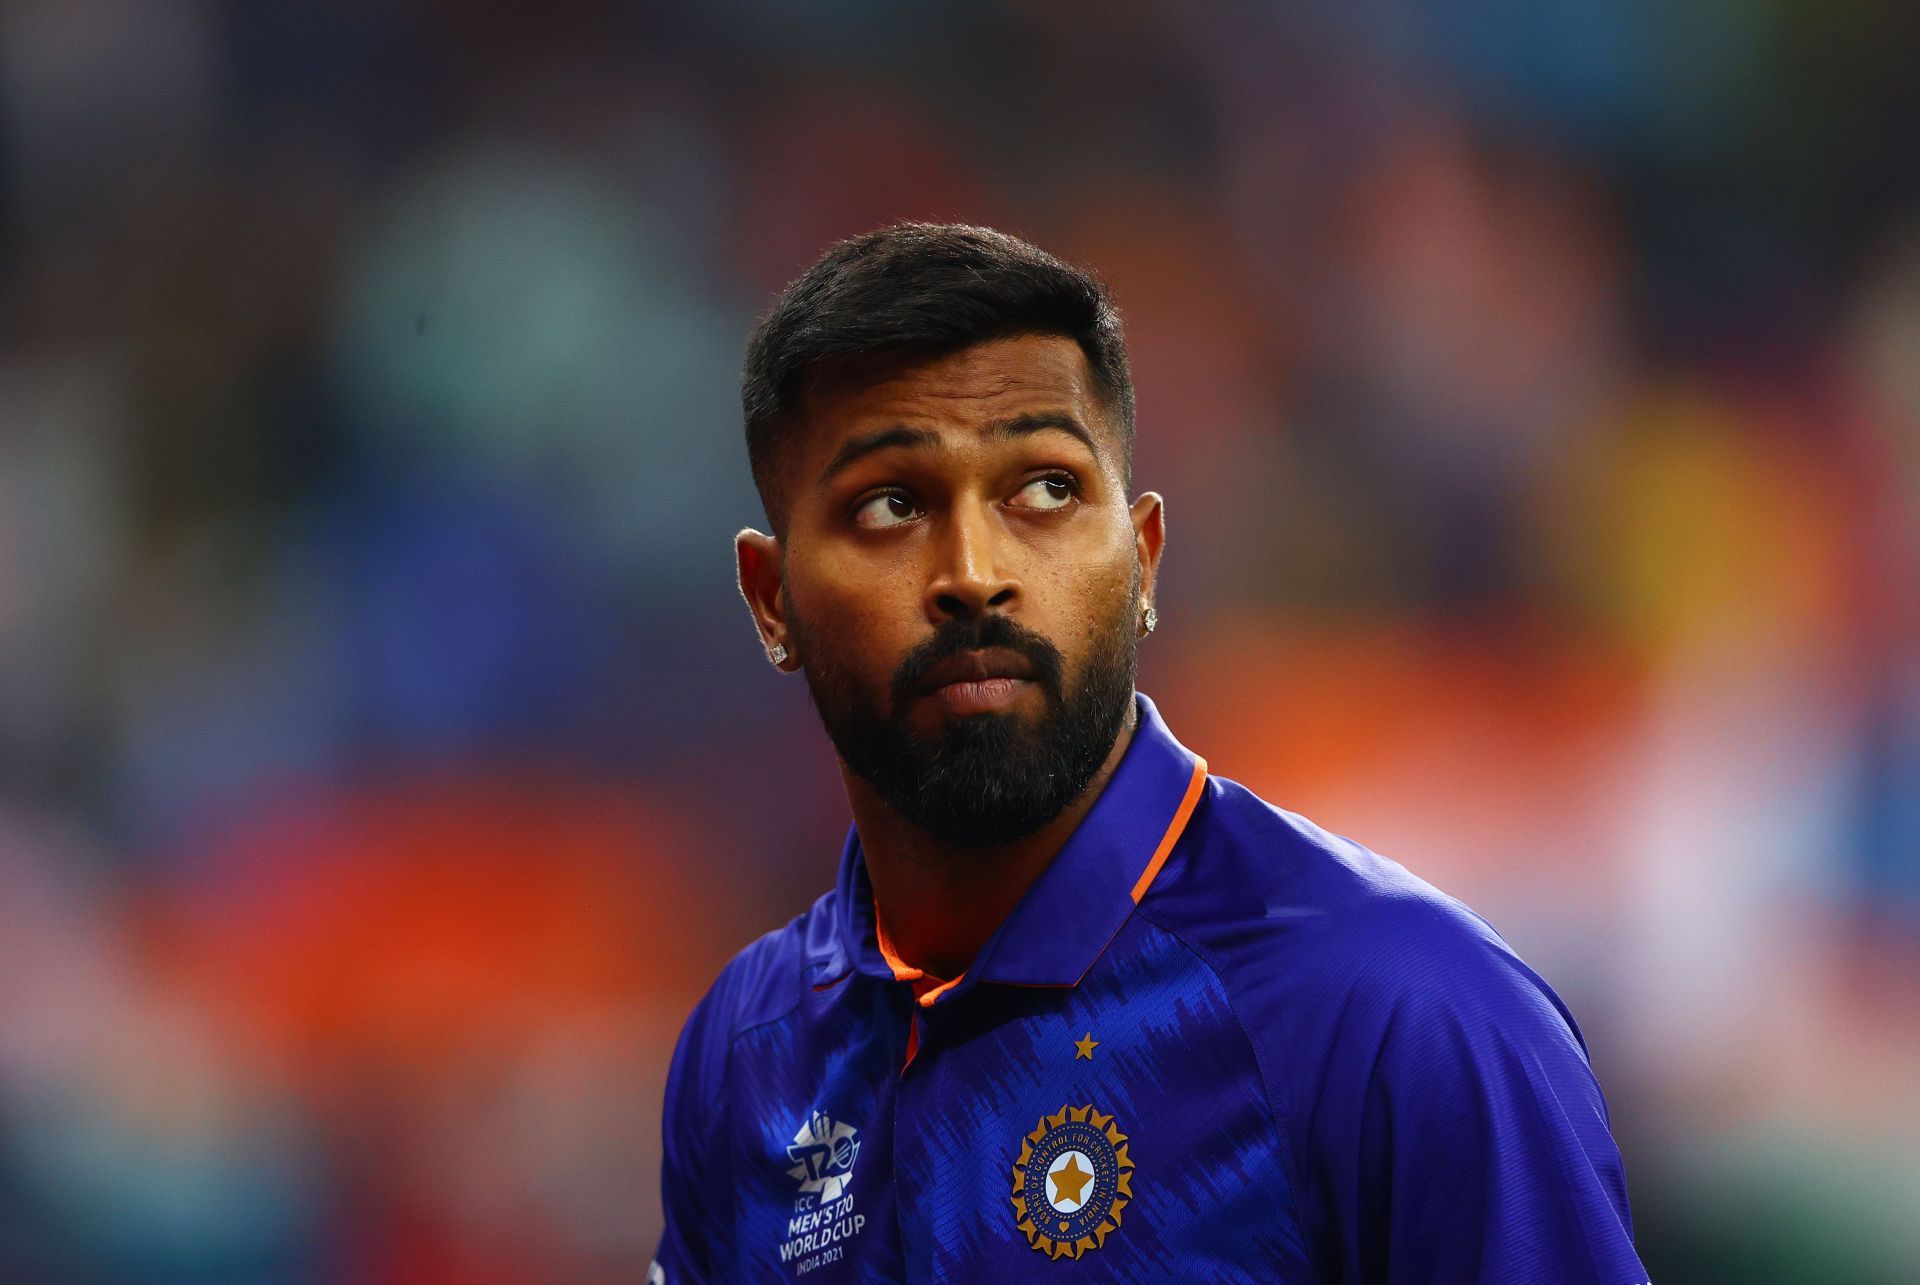 Hardik Pandya is not part of the Indian squad for the ODI series against South Africa